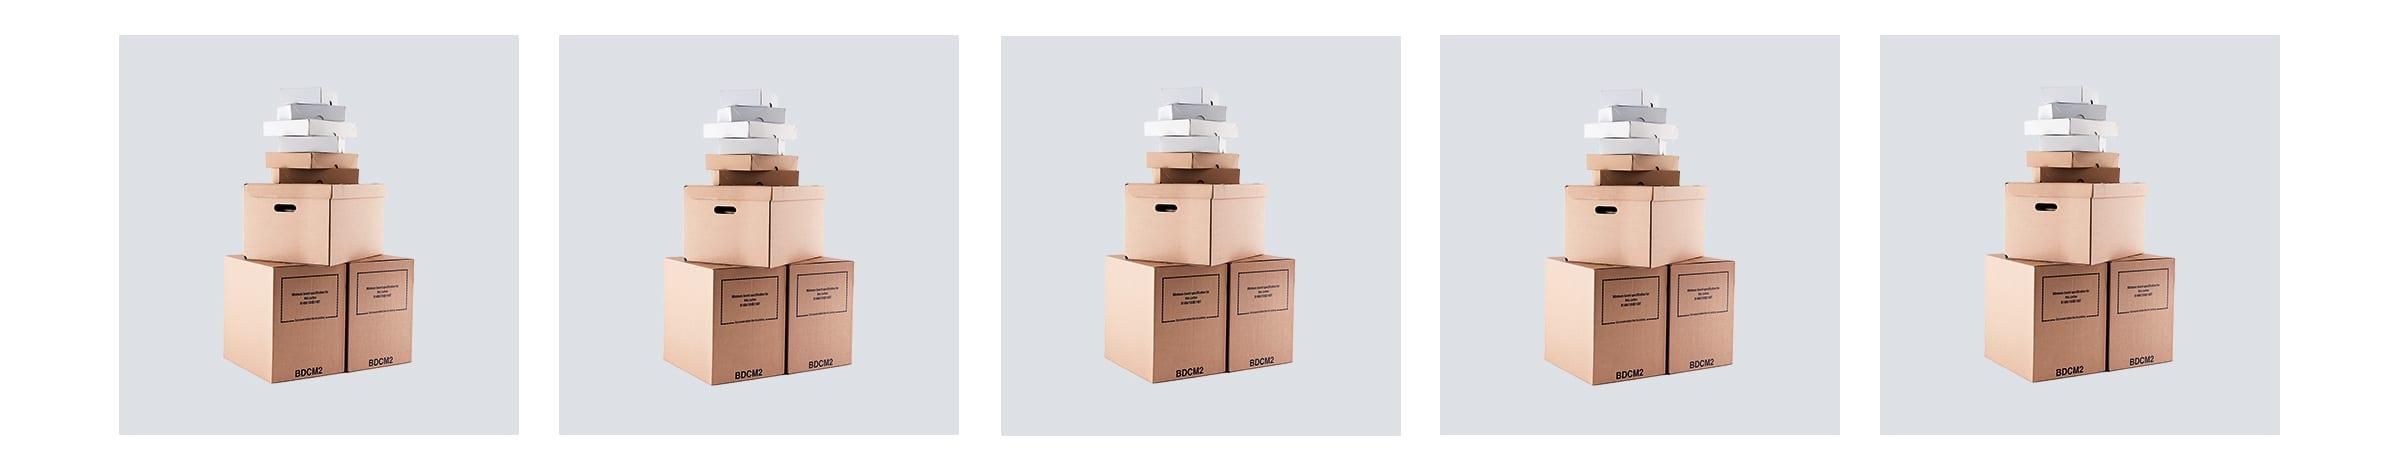 Product: All Boxes in Size Order | UK Packaging